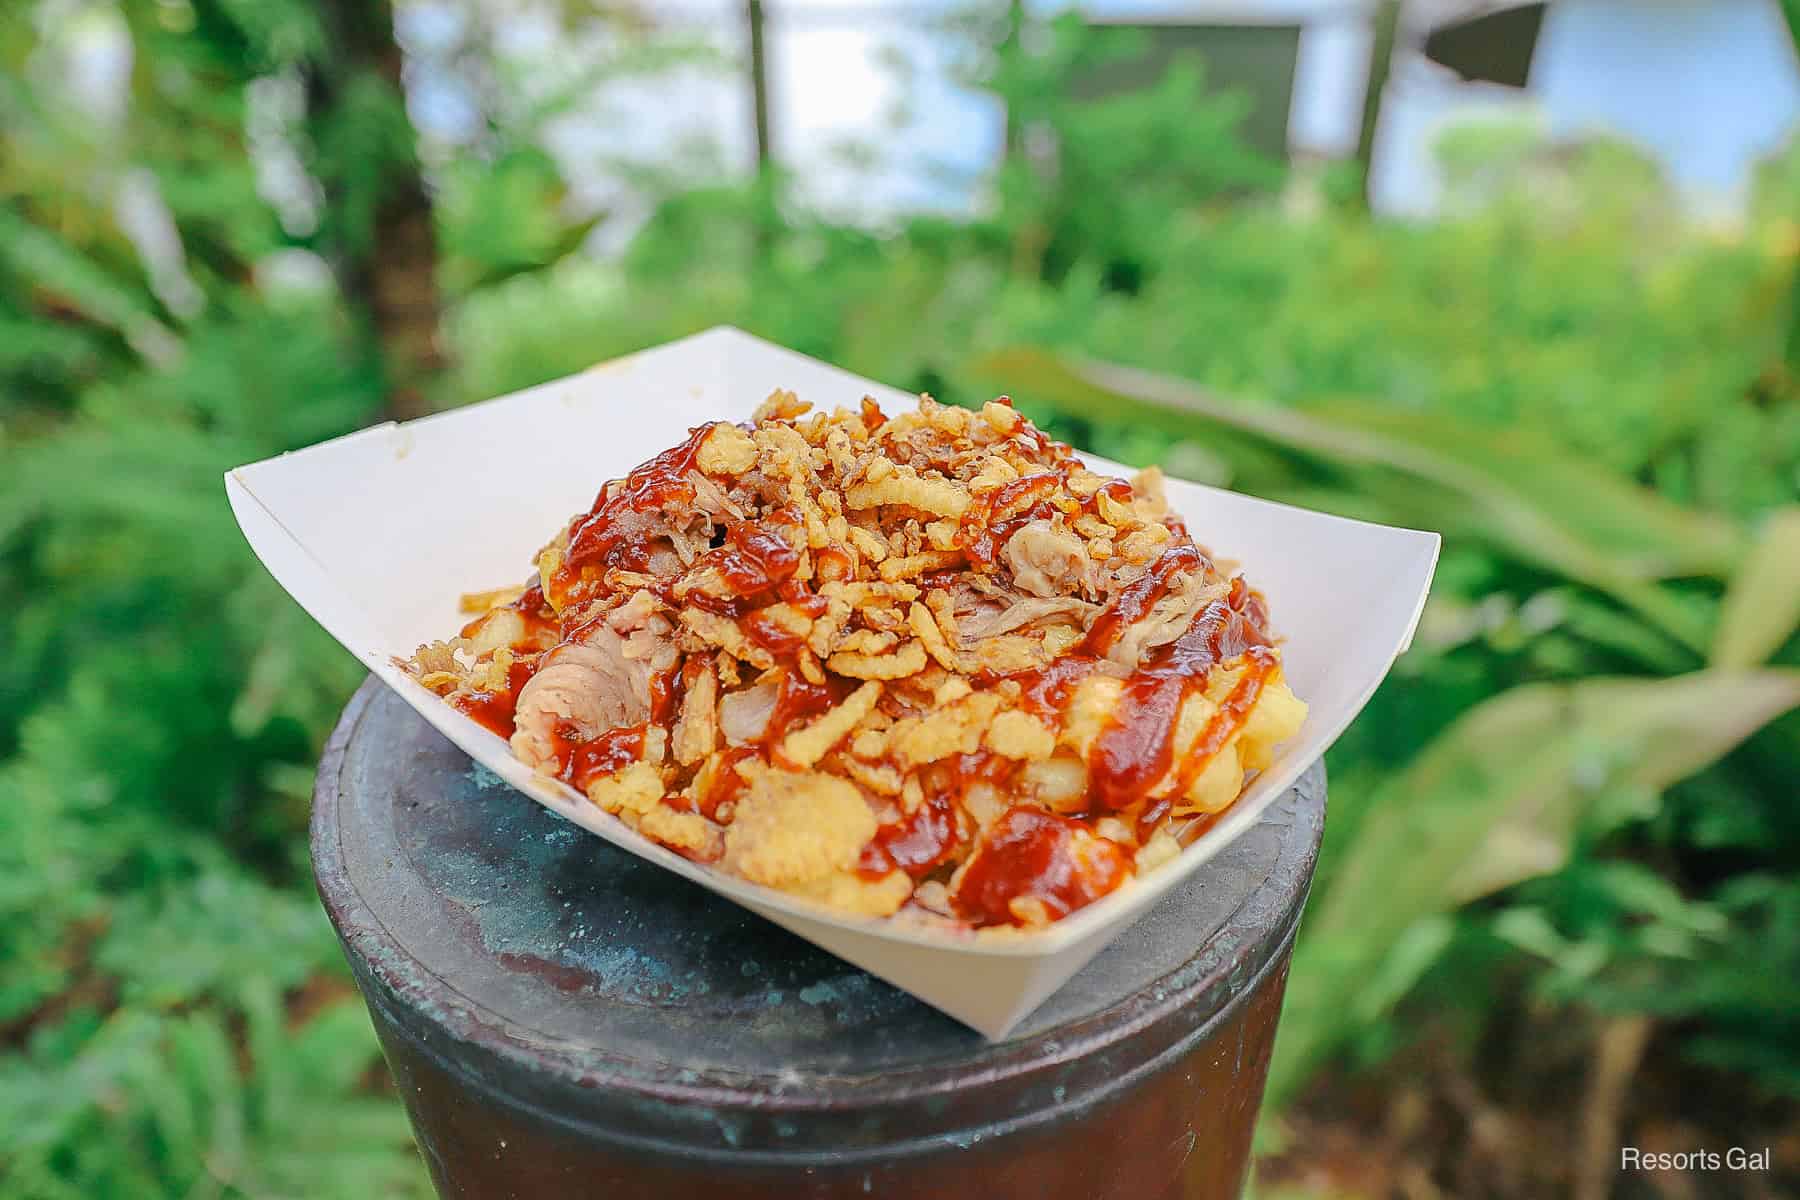 Flame Tree Barbecue: Baked Macaroni and Cheese with Pulled Pork 